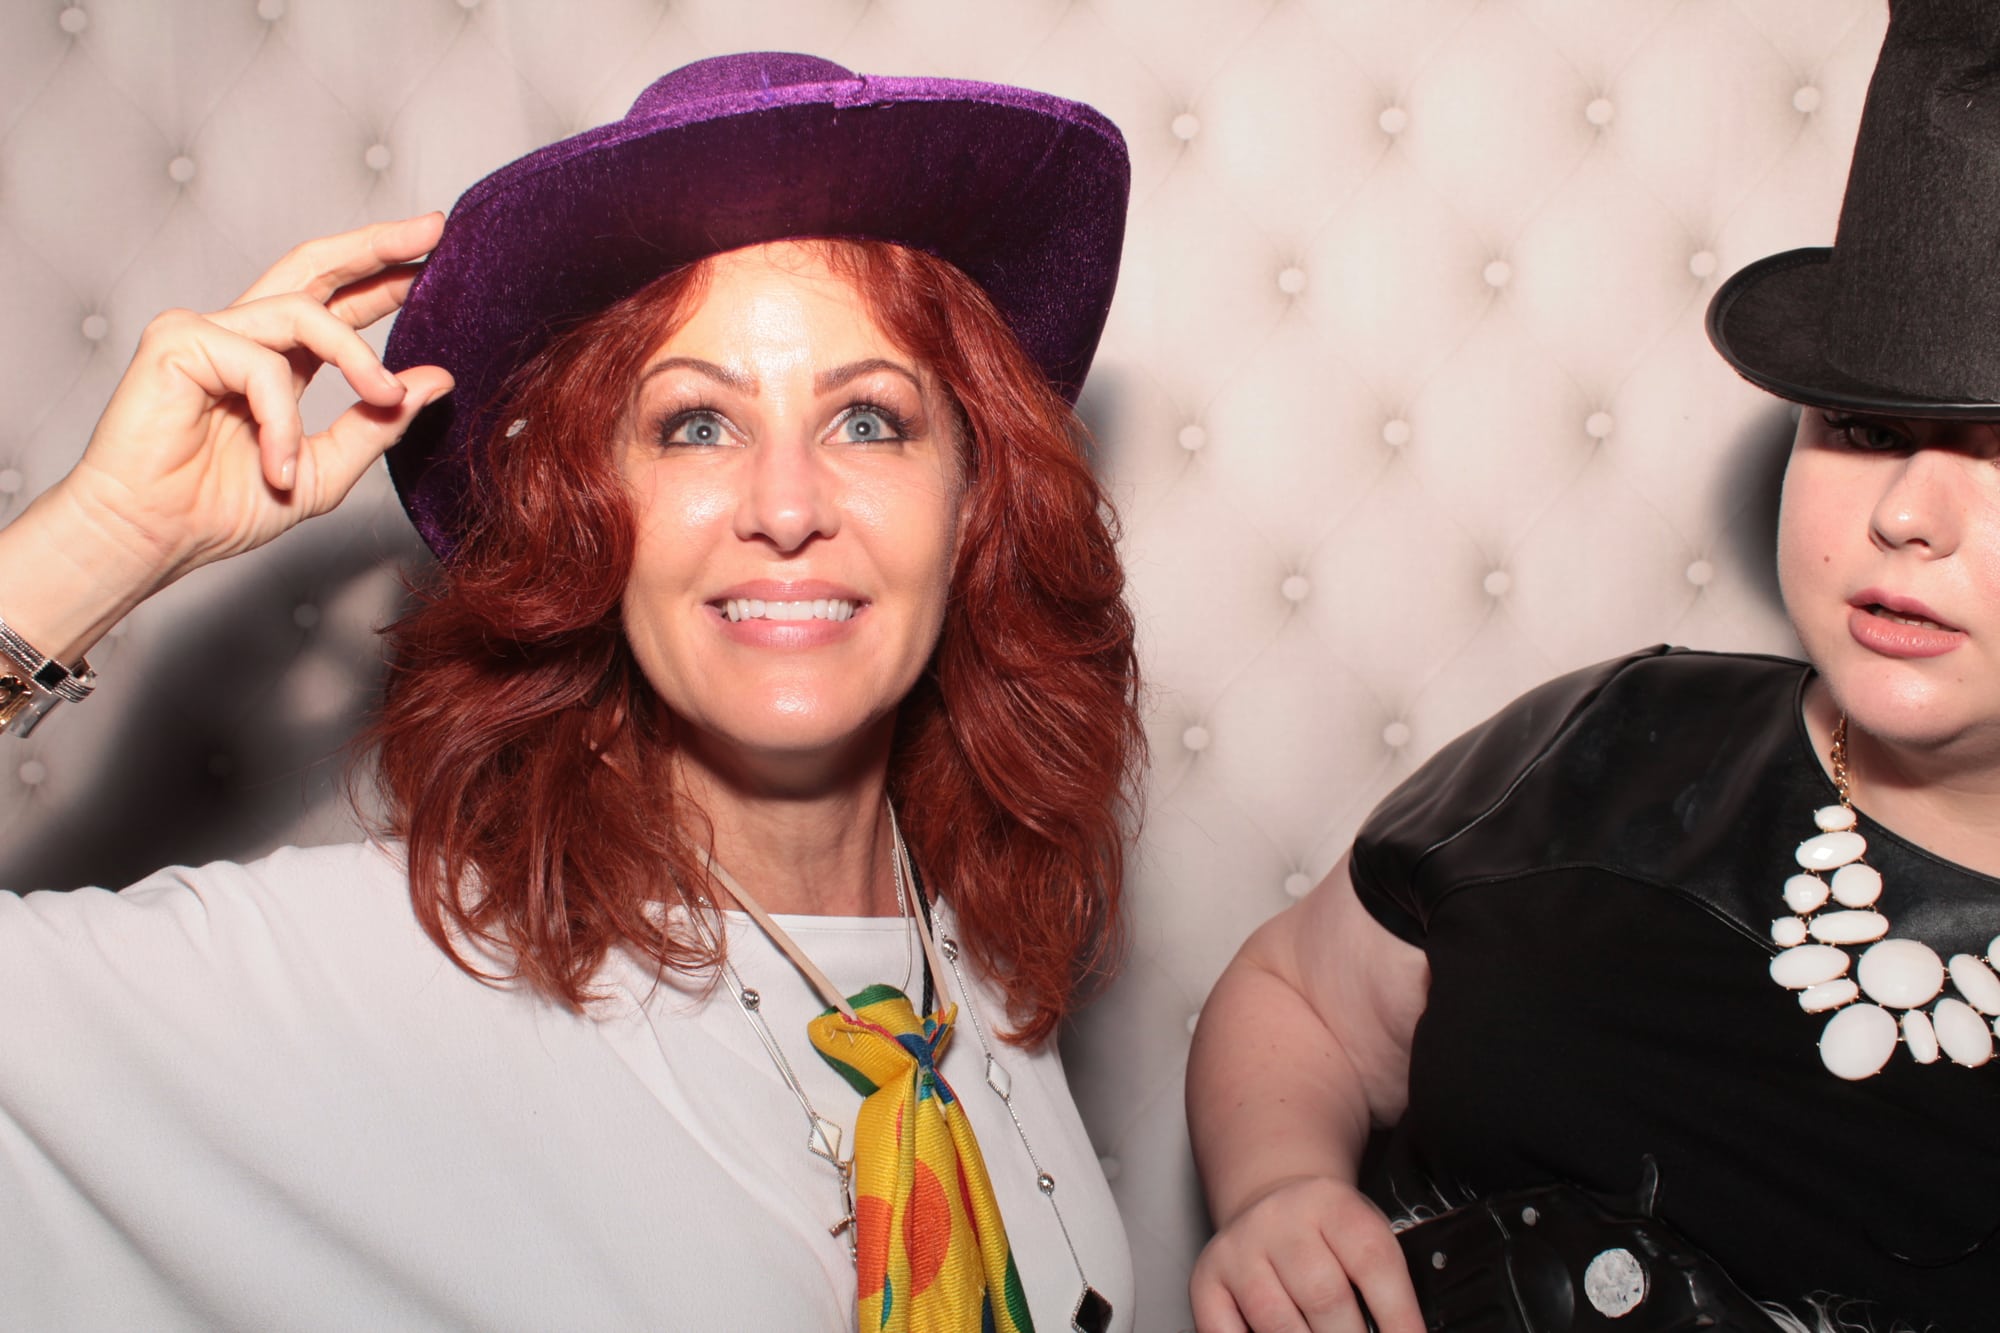 Photo-Booth-Rental-Austin-LGBT-Bee Cave-Birthday-Party-Props-Fun-No.1-Affordable-Social Media-Photography